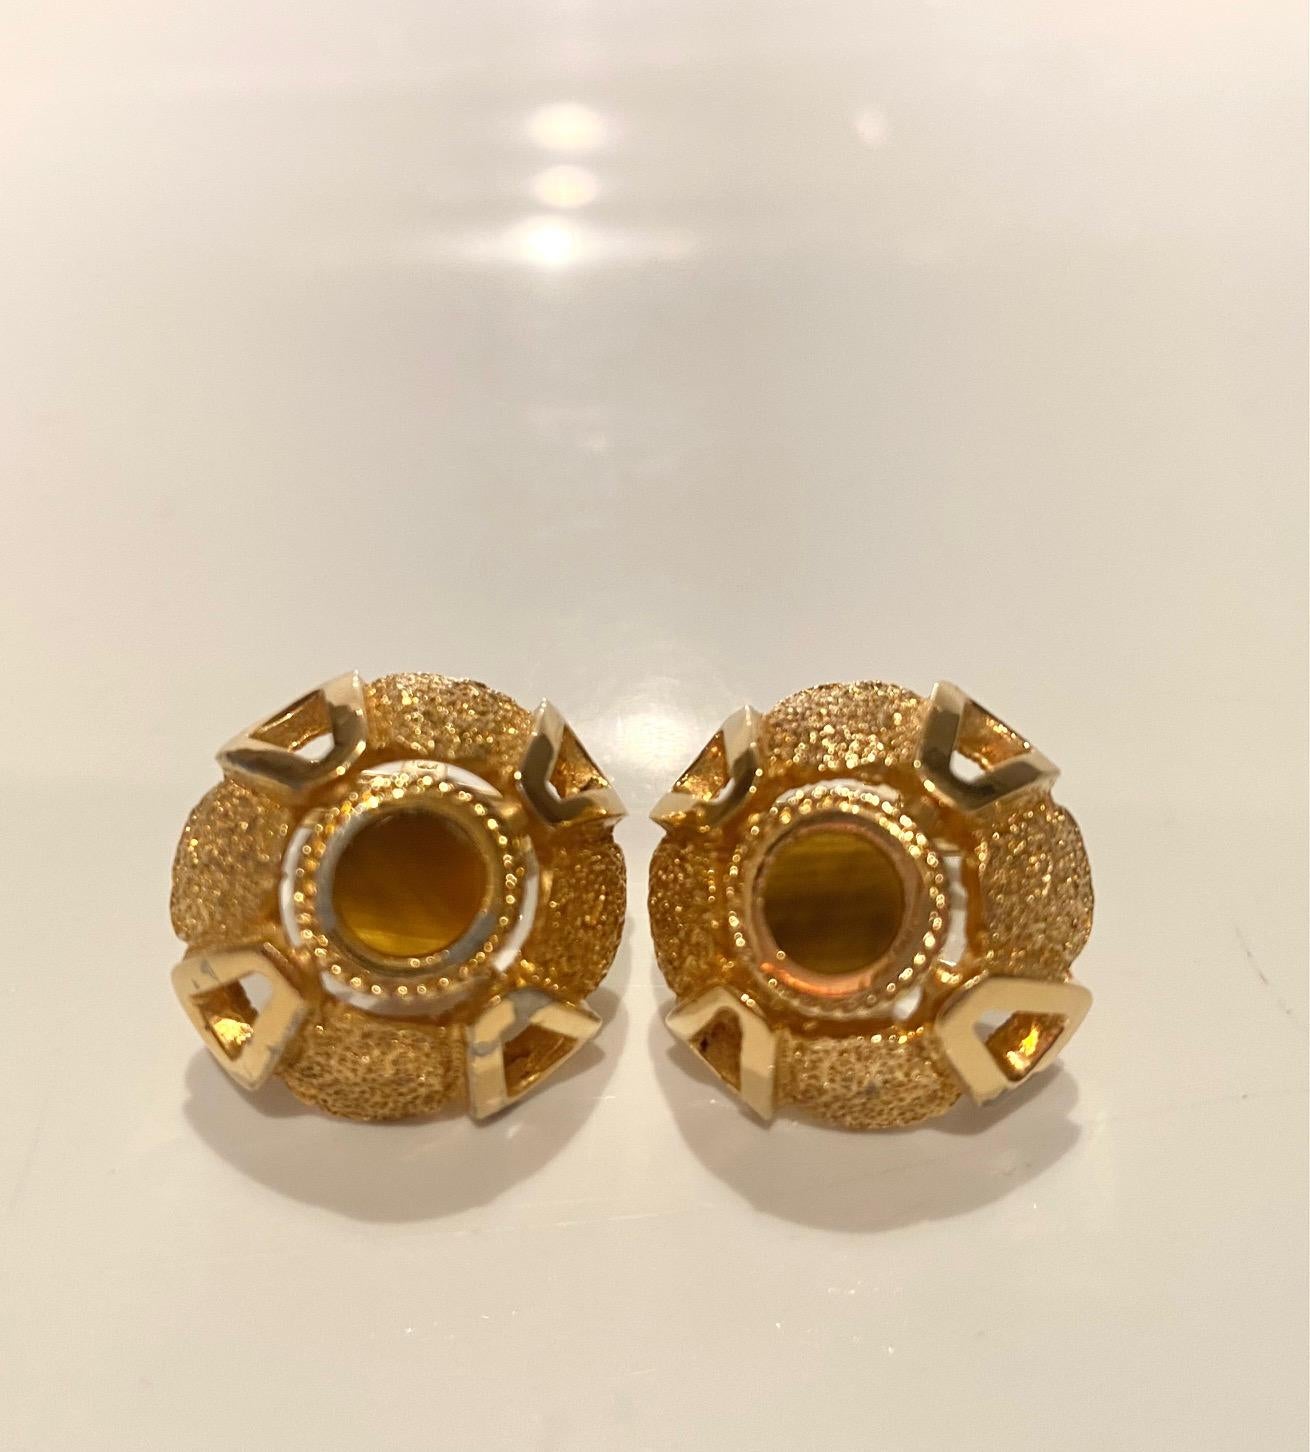 Beautiful 1980s Christian Dior gold plated Tiger's Eye stone cufflinks, flower shaped, Dior signed, the set comes with a tie chained pin that can be also worn as a brooch

Measurements: 2.5cm / 0.98in 

Condition: 1980s, like new, comes with